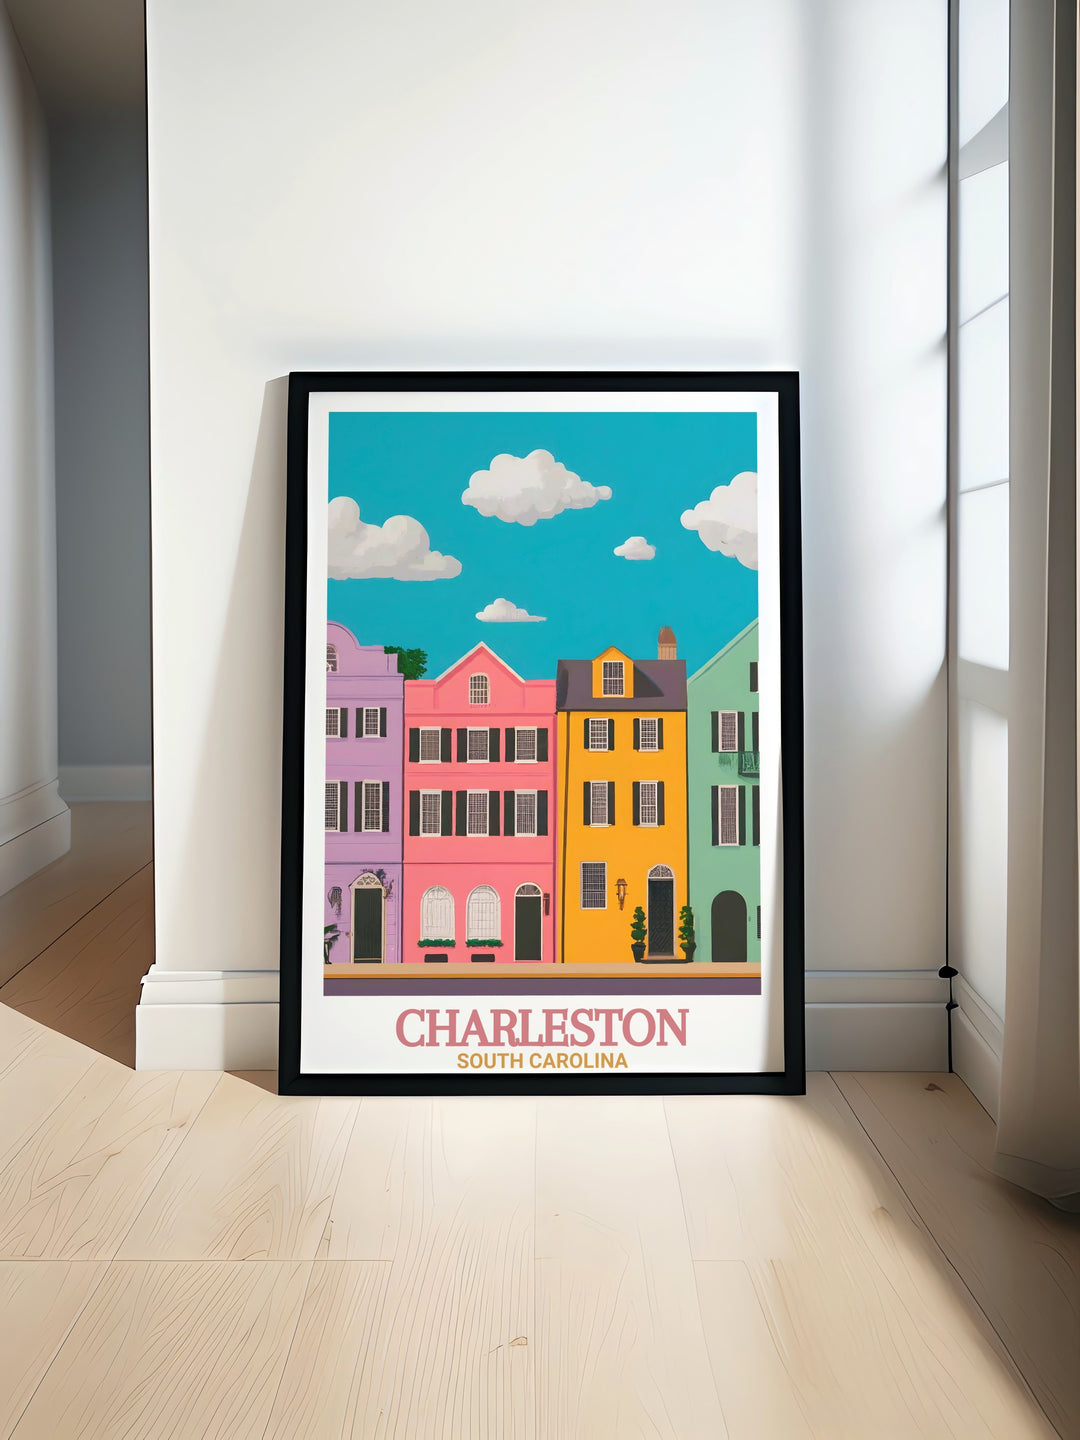 Rainbow Row travel poster print featuring the iconic Charleston landmark with its vividly colored historic houses perfect for adding charm and elegance to any home decor or as a unique and thoughtful gift idea